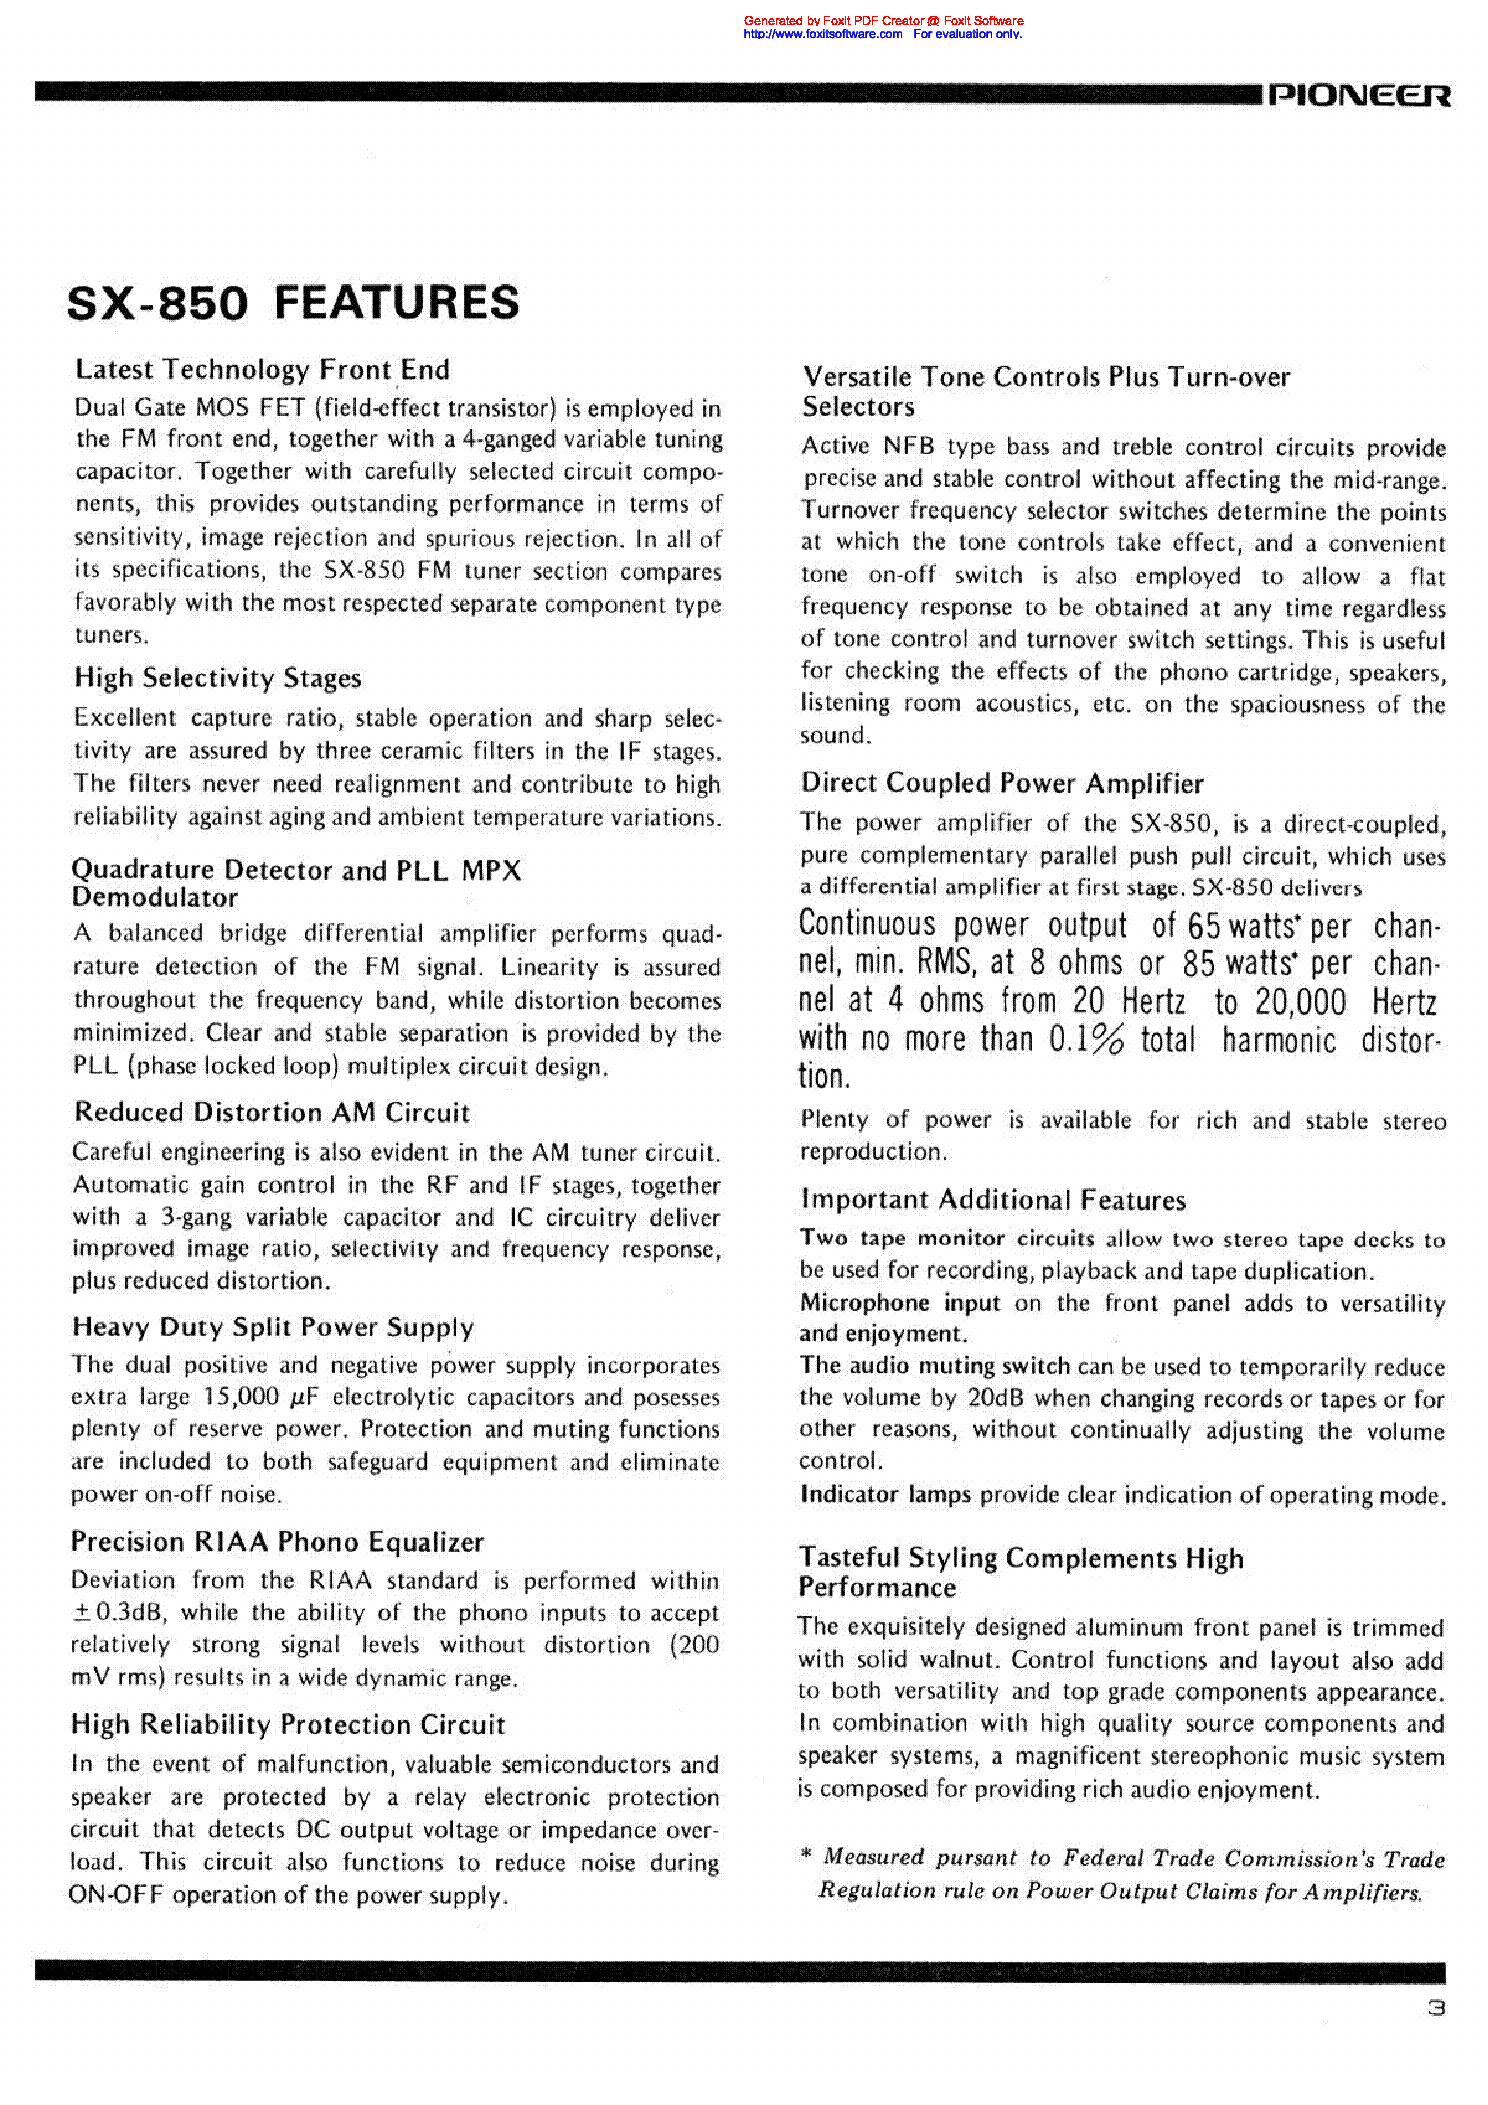 PIONEER SX-850 SM service manual (2nd page)